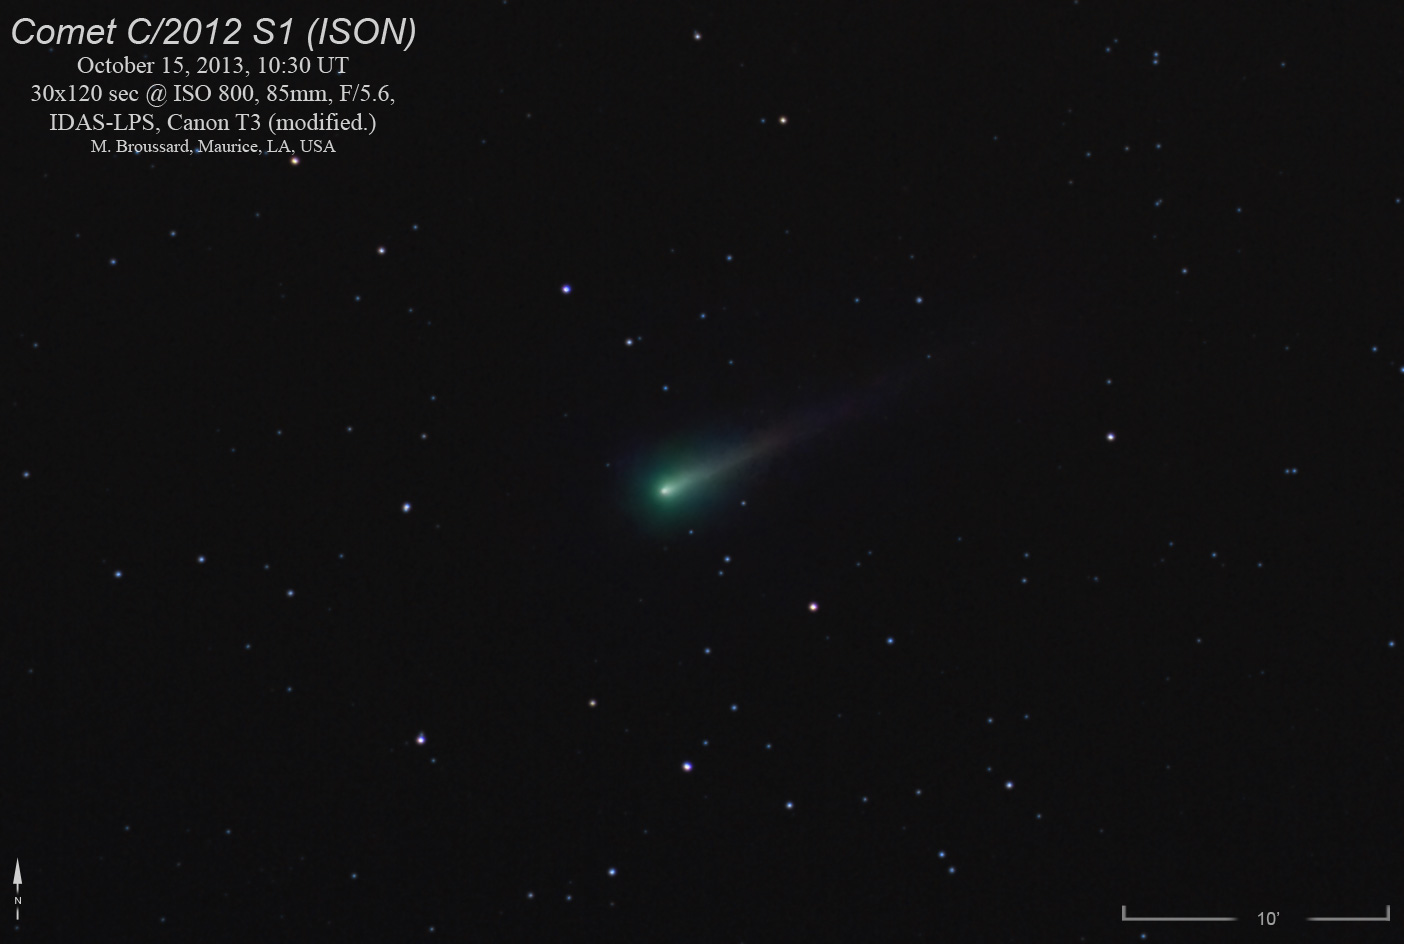 Comet ISON on October 15, 2013 | Mike's Astrophotography Gallery & Blog